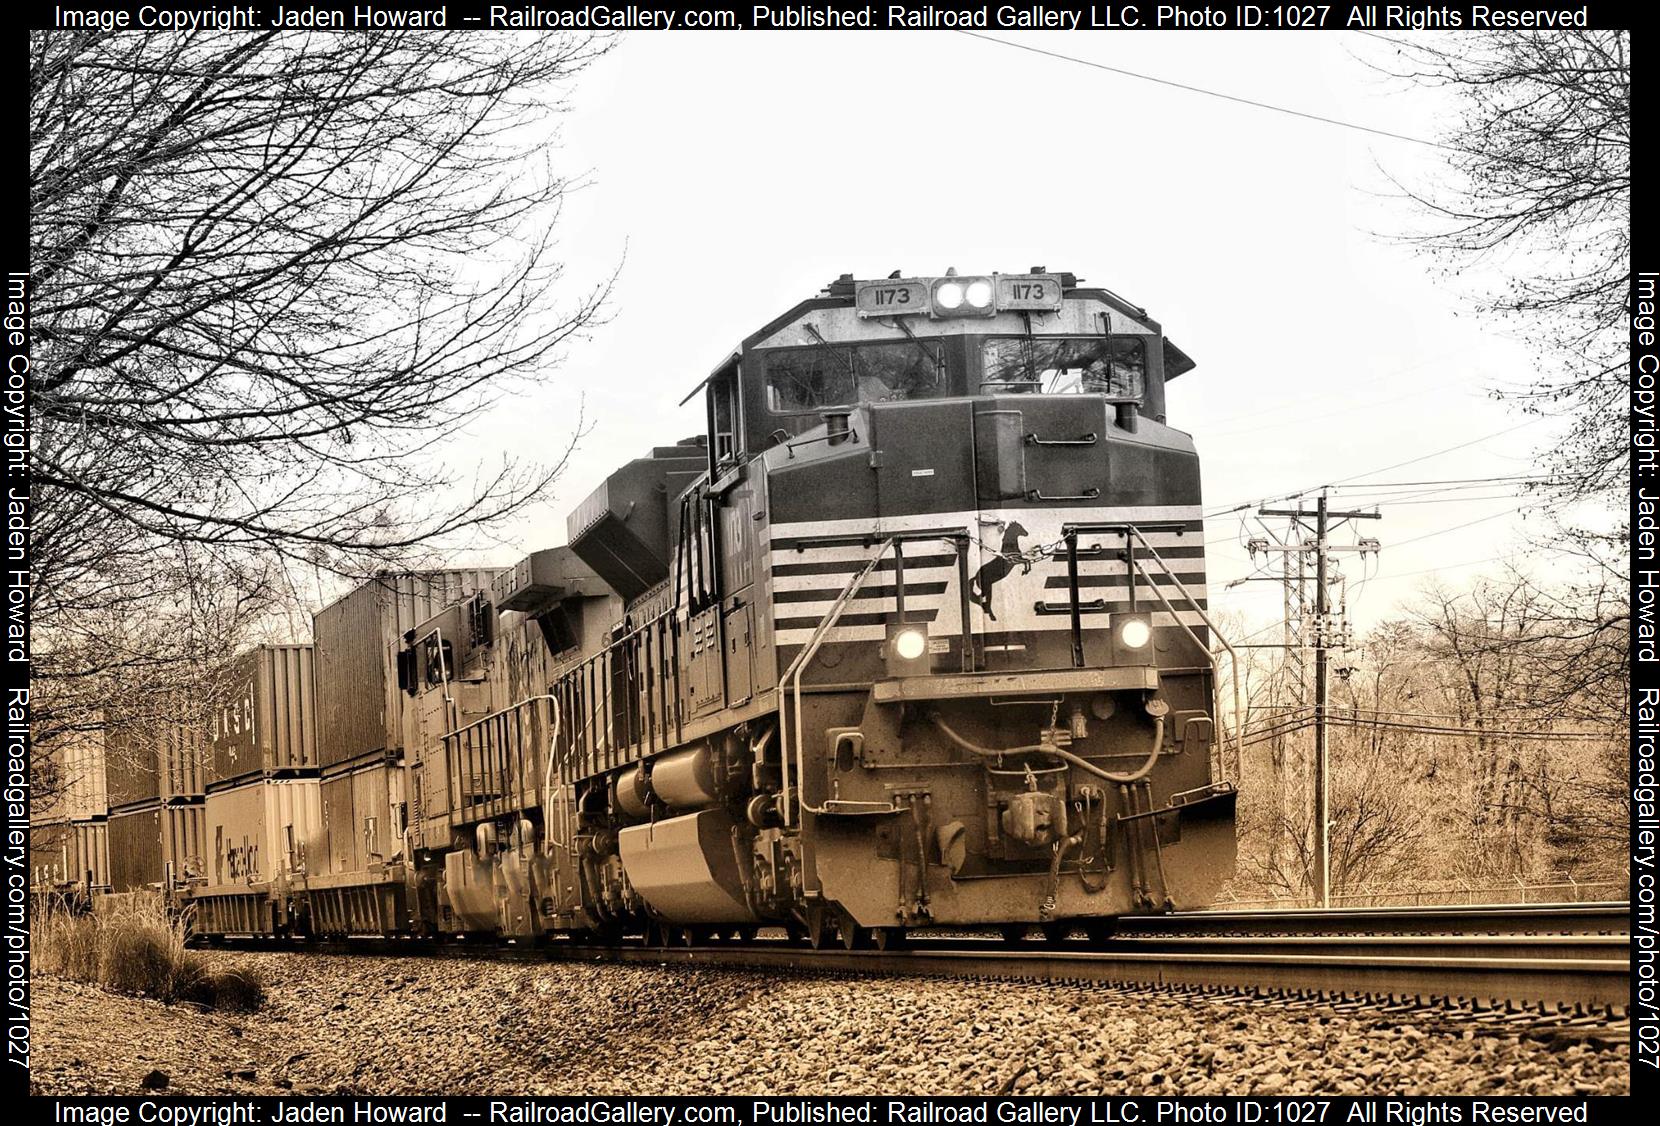 1173 is a class EMD SD70ACe and  is pictured in Arcadia , South Carolina, USA.  This was taken along the Piedmont Division/Charlotte District  on the Norfolk Southern. Photo Copyright: Jaden Howard  uploaded to Railroad Gallery on 05/04/2023. This photograph of 1173 was taken on Thursday, May 04, 2023. All Rights Reserved. 